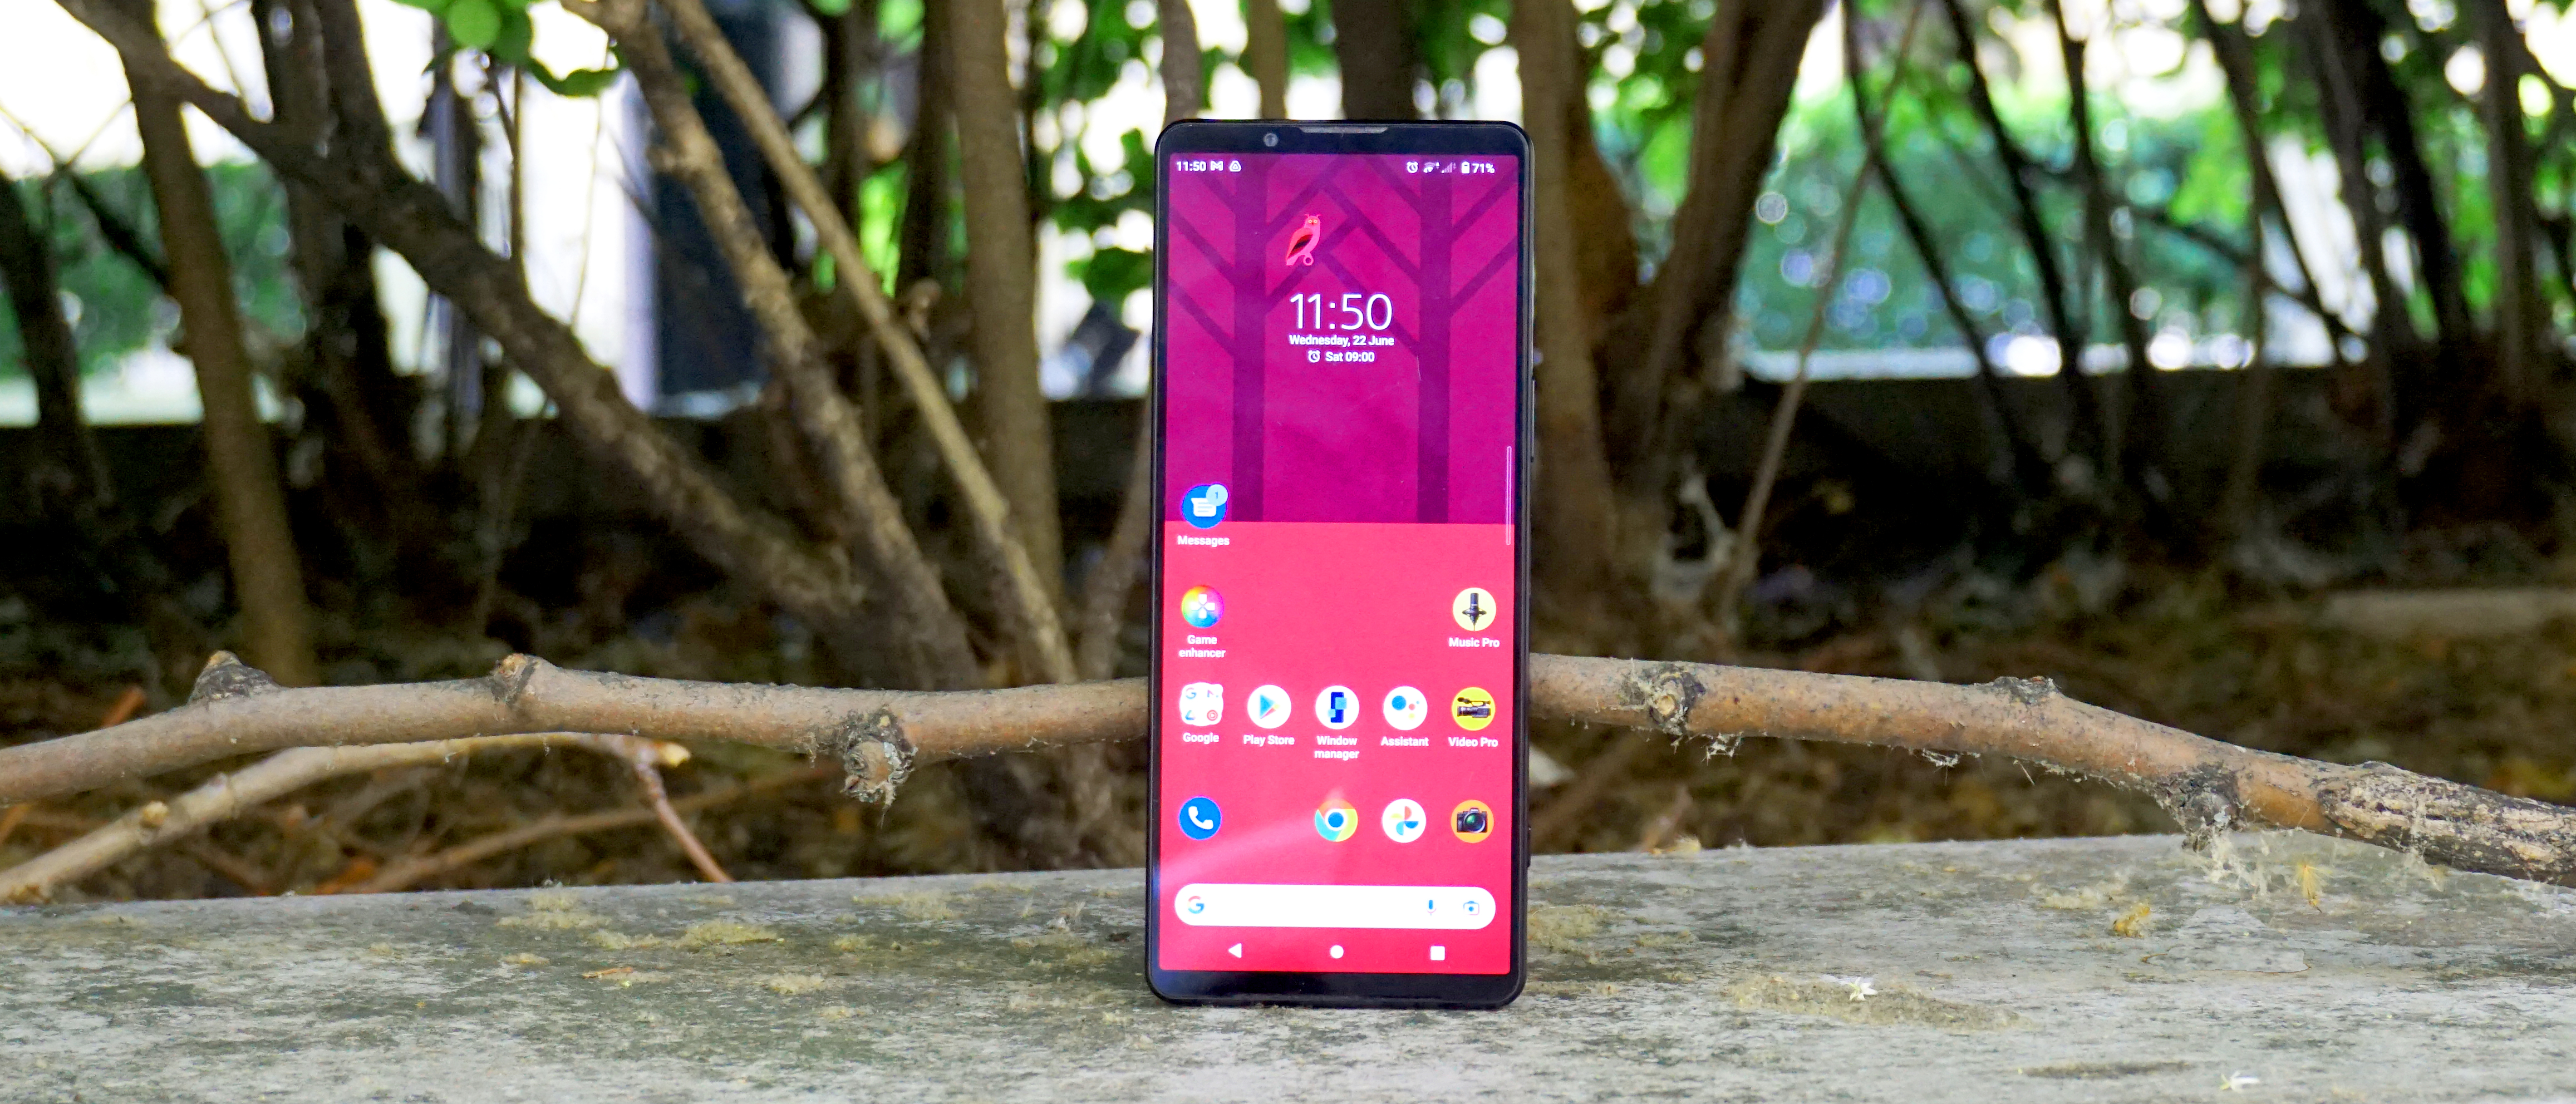 Meetbaar vleugel Stationair Sony Xperia 1 IV review: a fantastic camera phone if you can ignore some  flaws | TechRadar